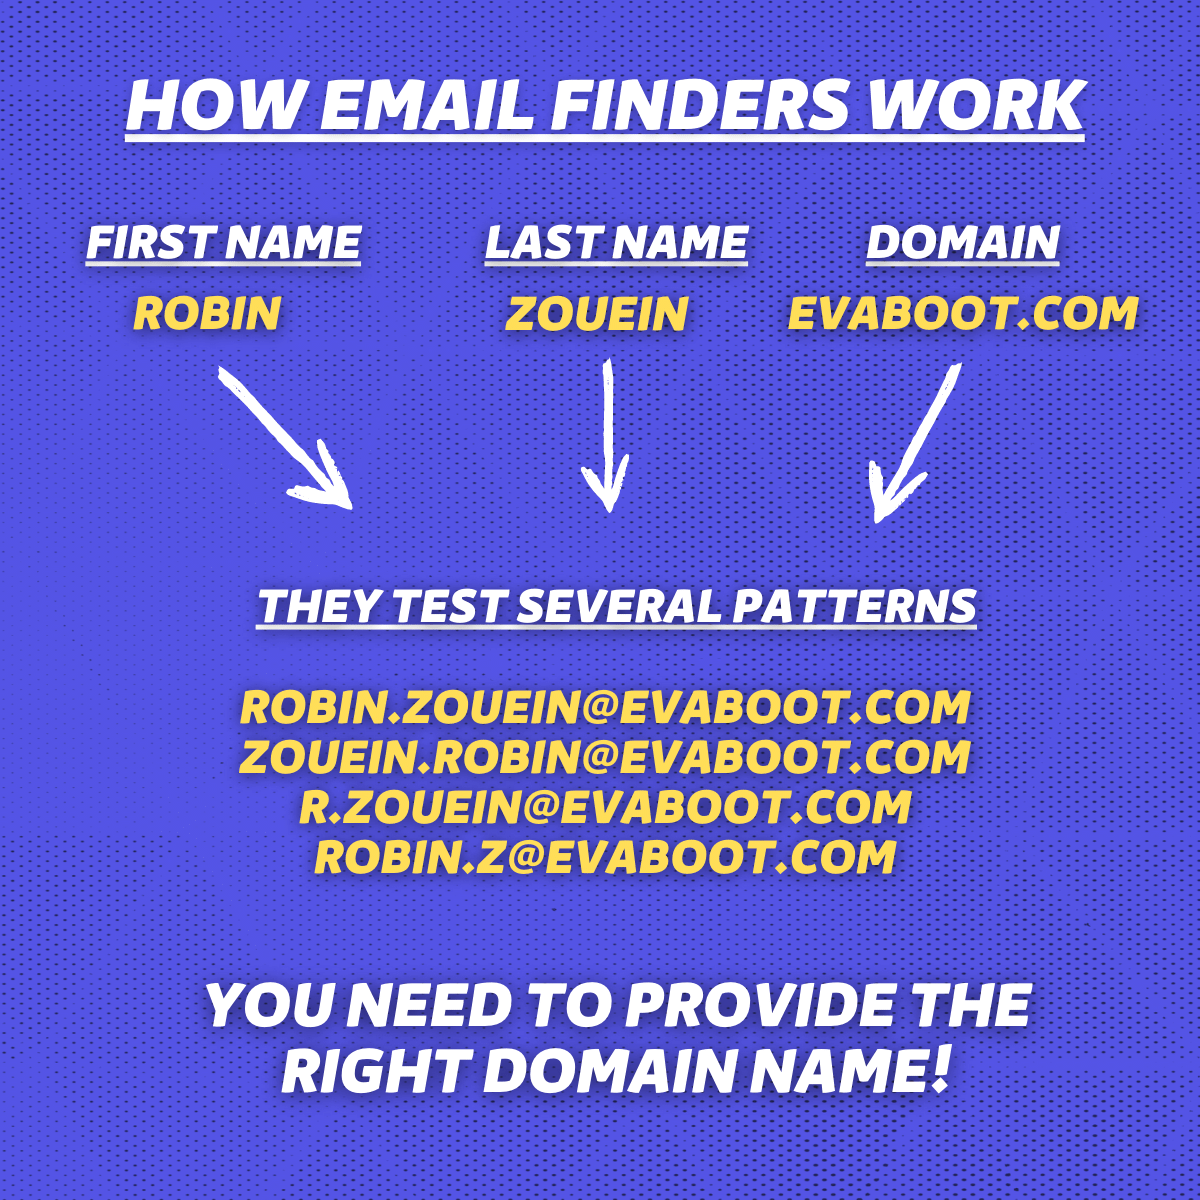 how emails finders work